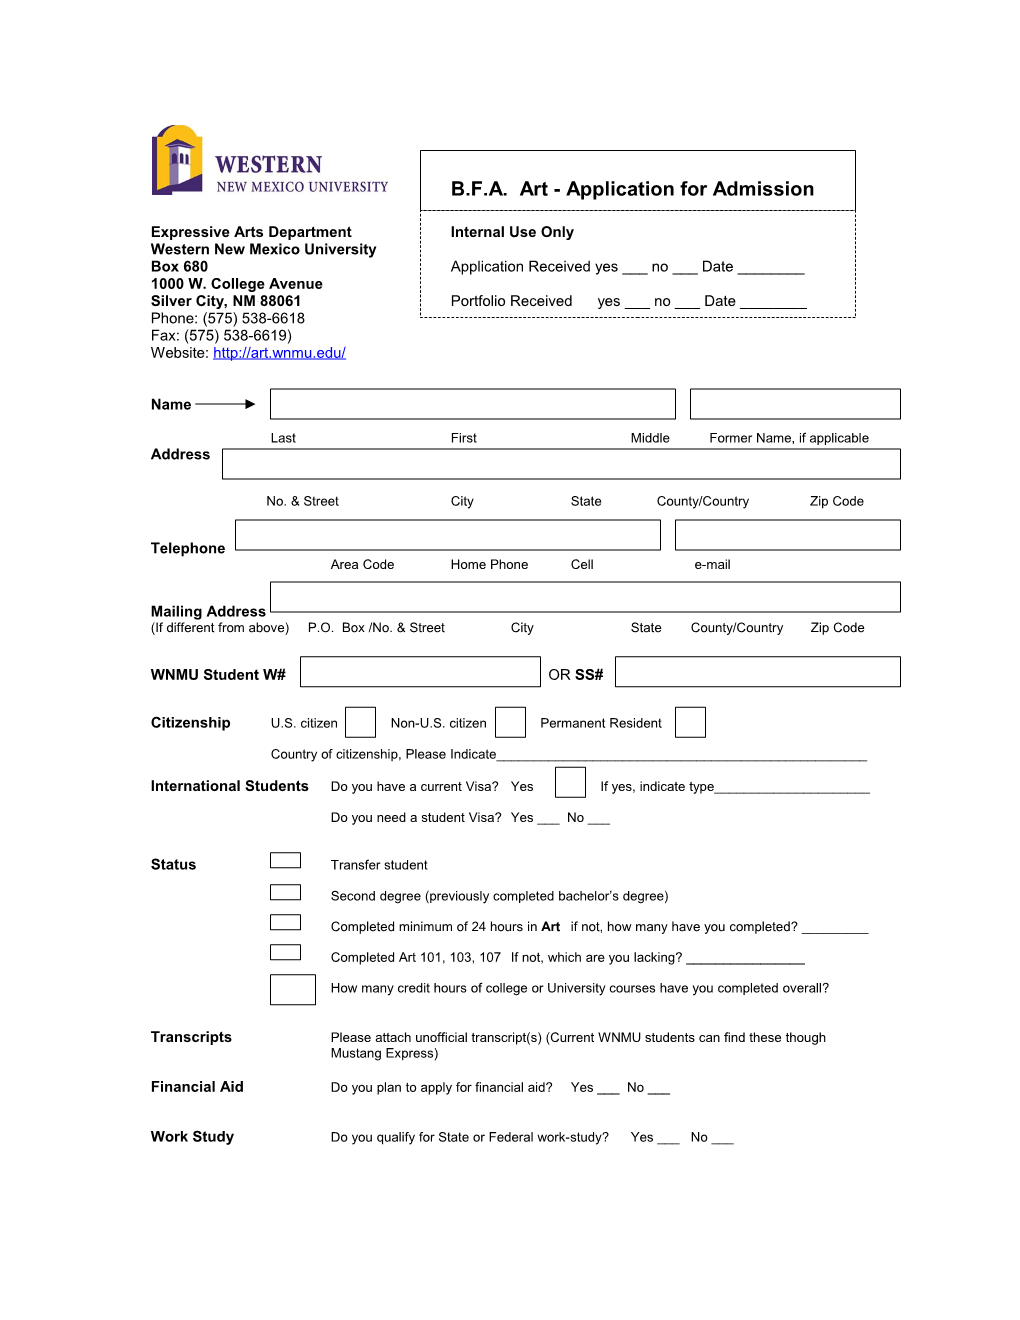 B.F.A. Art - Application for Admission